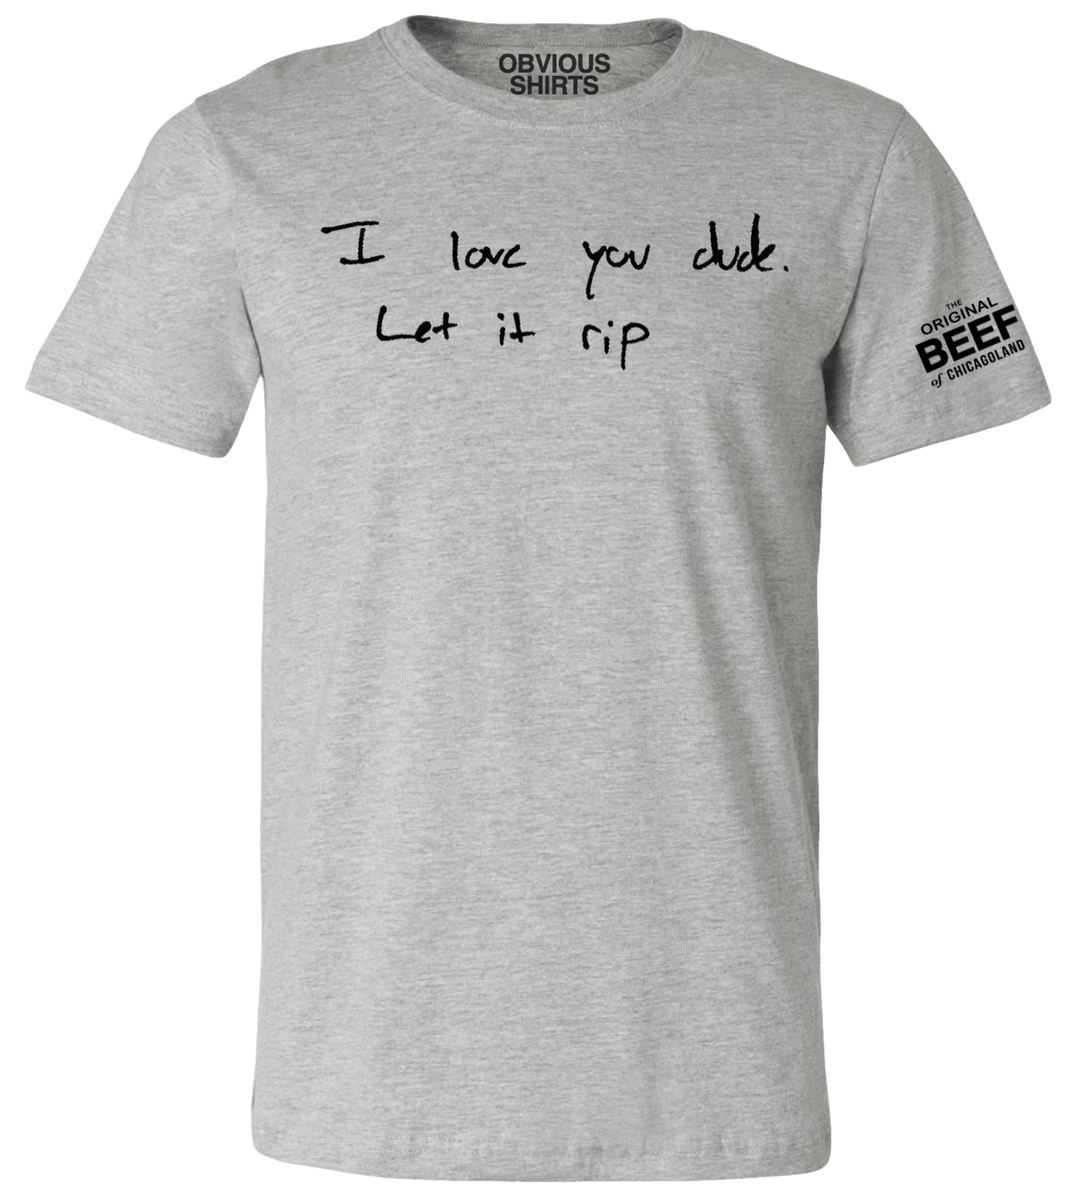 I LOVE YOU DUDE. LET IT RIP. - OBVIOUS SHIRTS